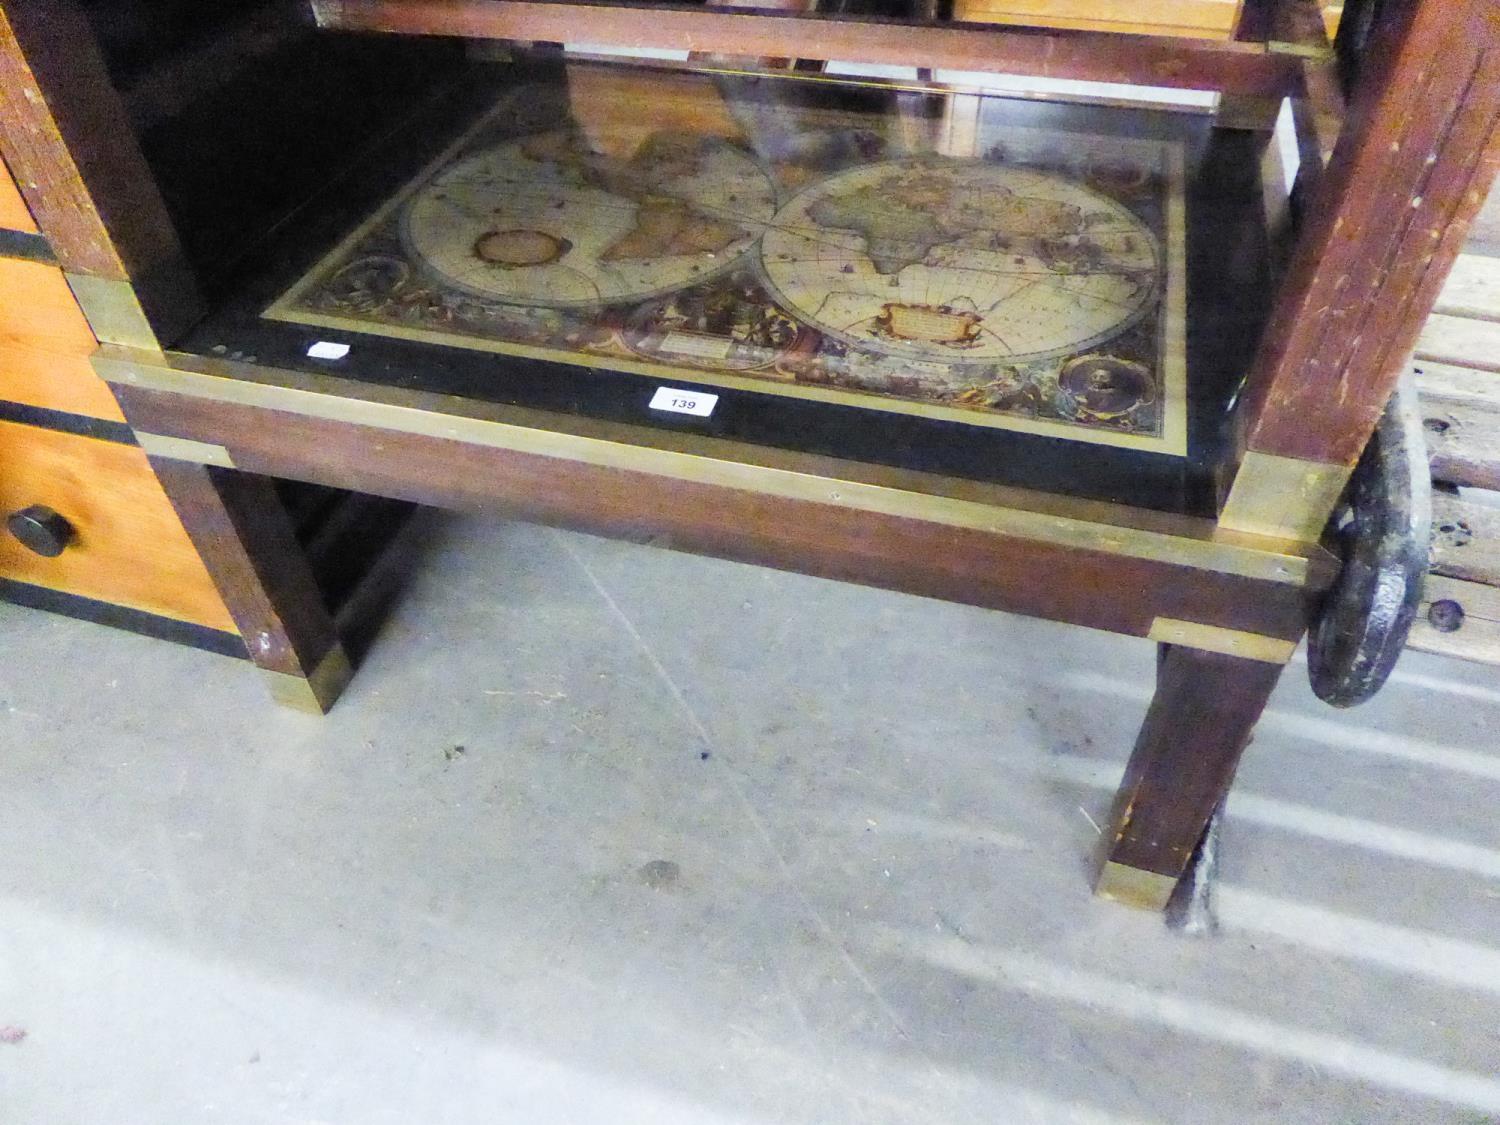 A MAHOGANY OBLONG COFFEE TABLE WITH GLASS ‘MAP’ TOP WITH BRASS BOUND EDGES, ‘H’ STRETCHERS